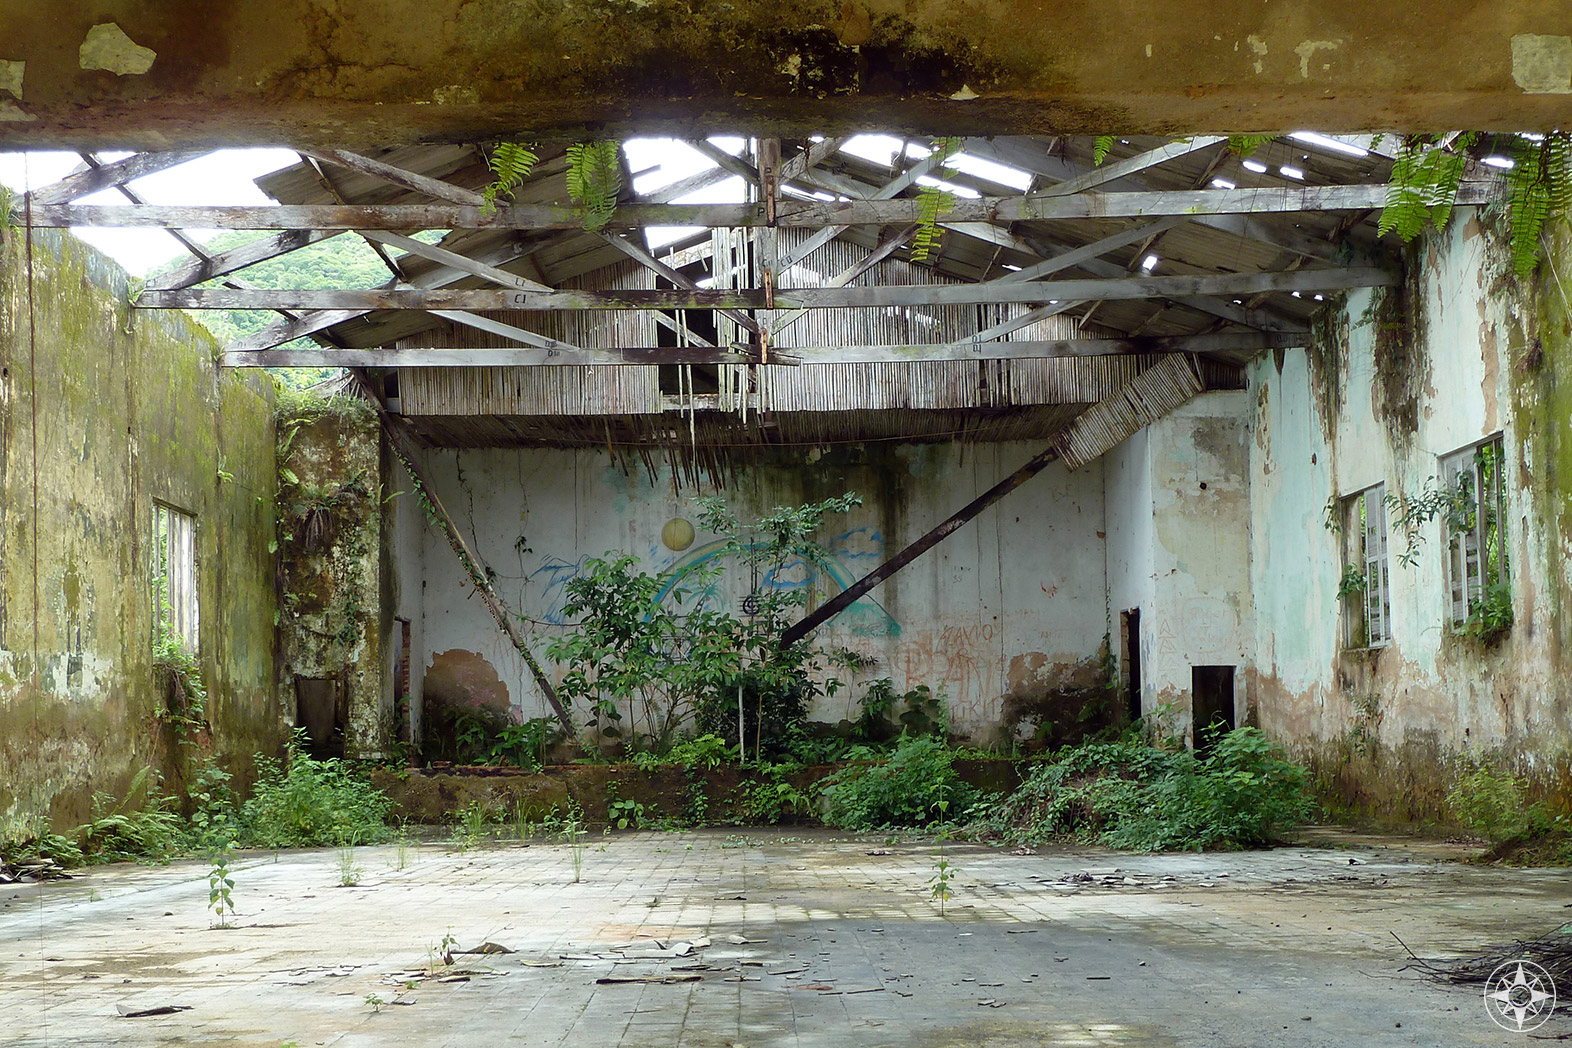 Look inside abandoned building in Dois Rios, Ilha Grande, Brazil.